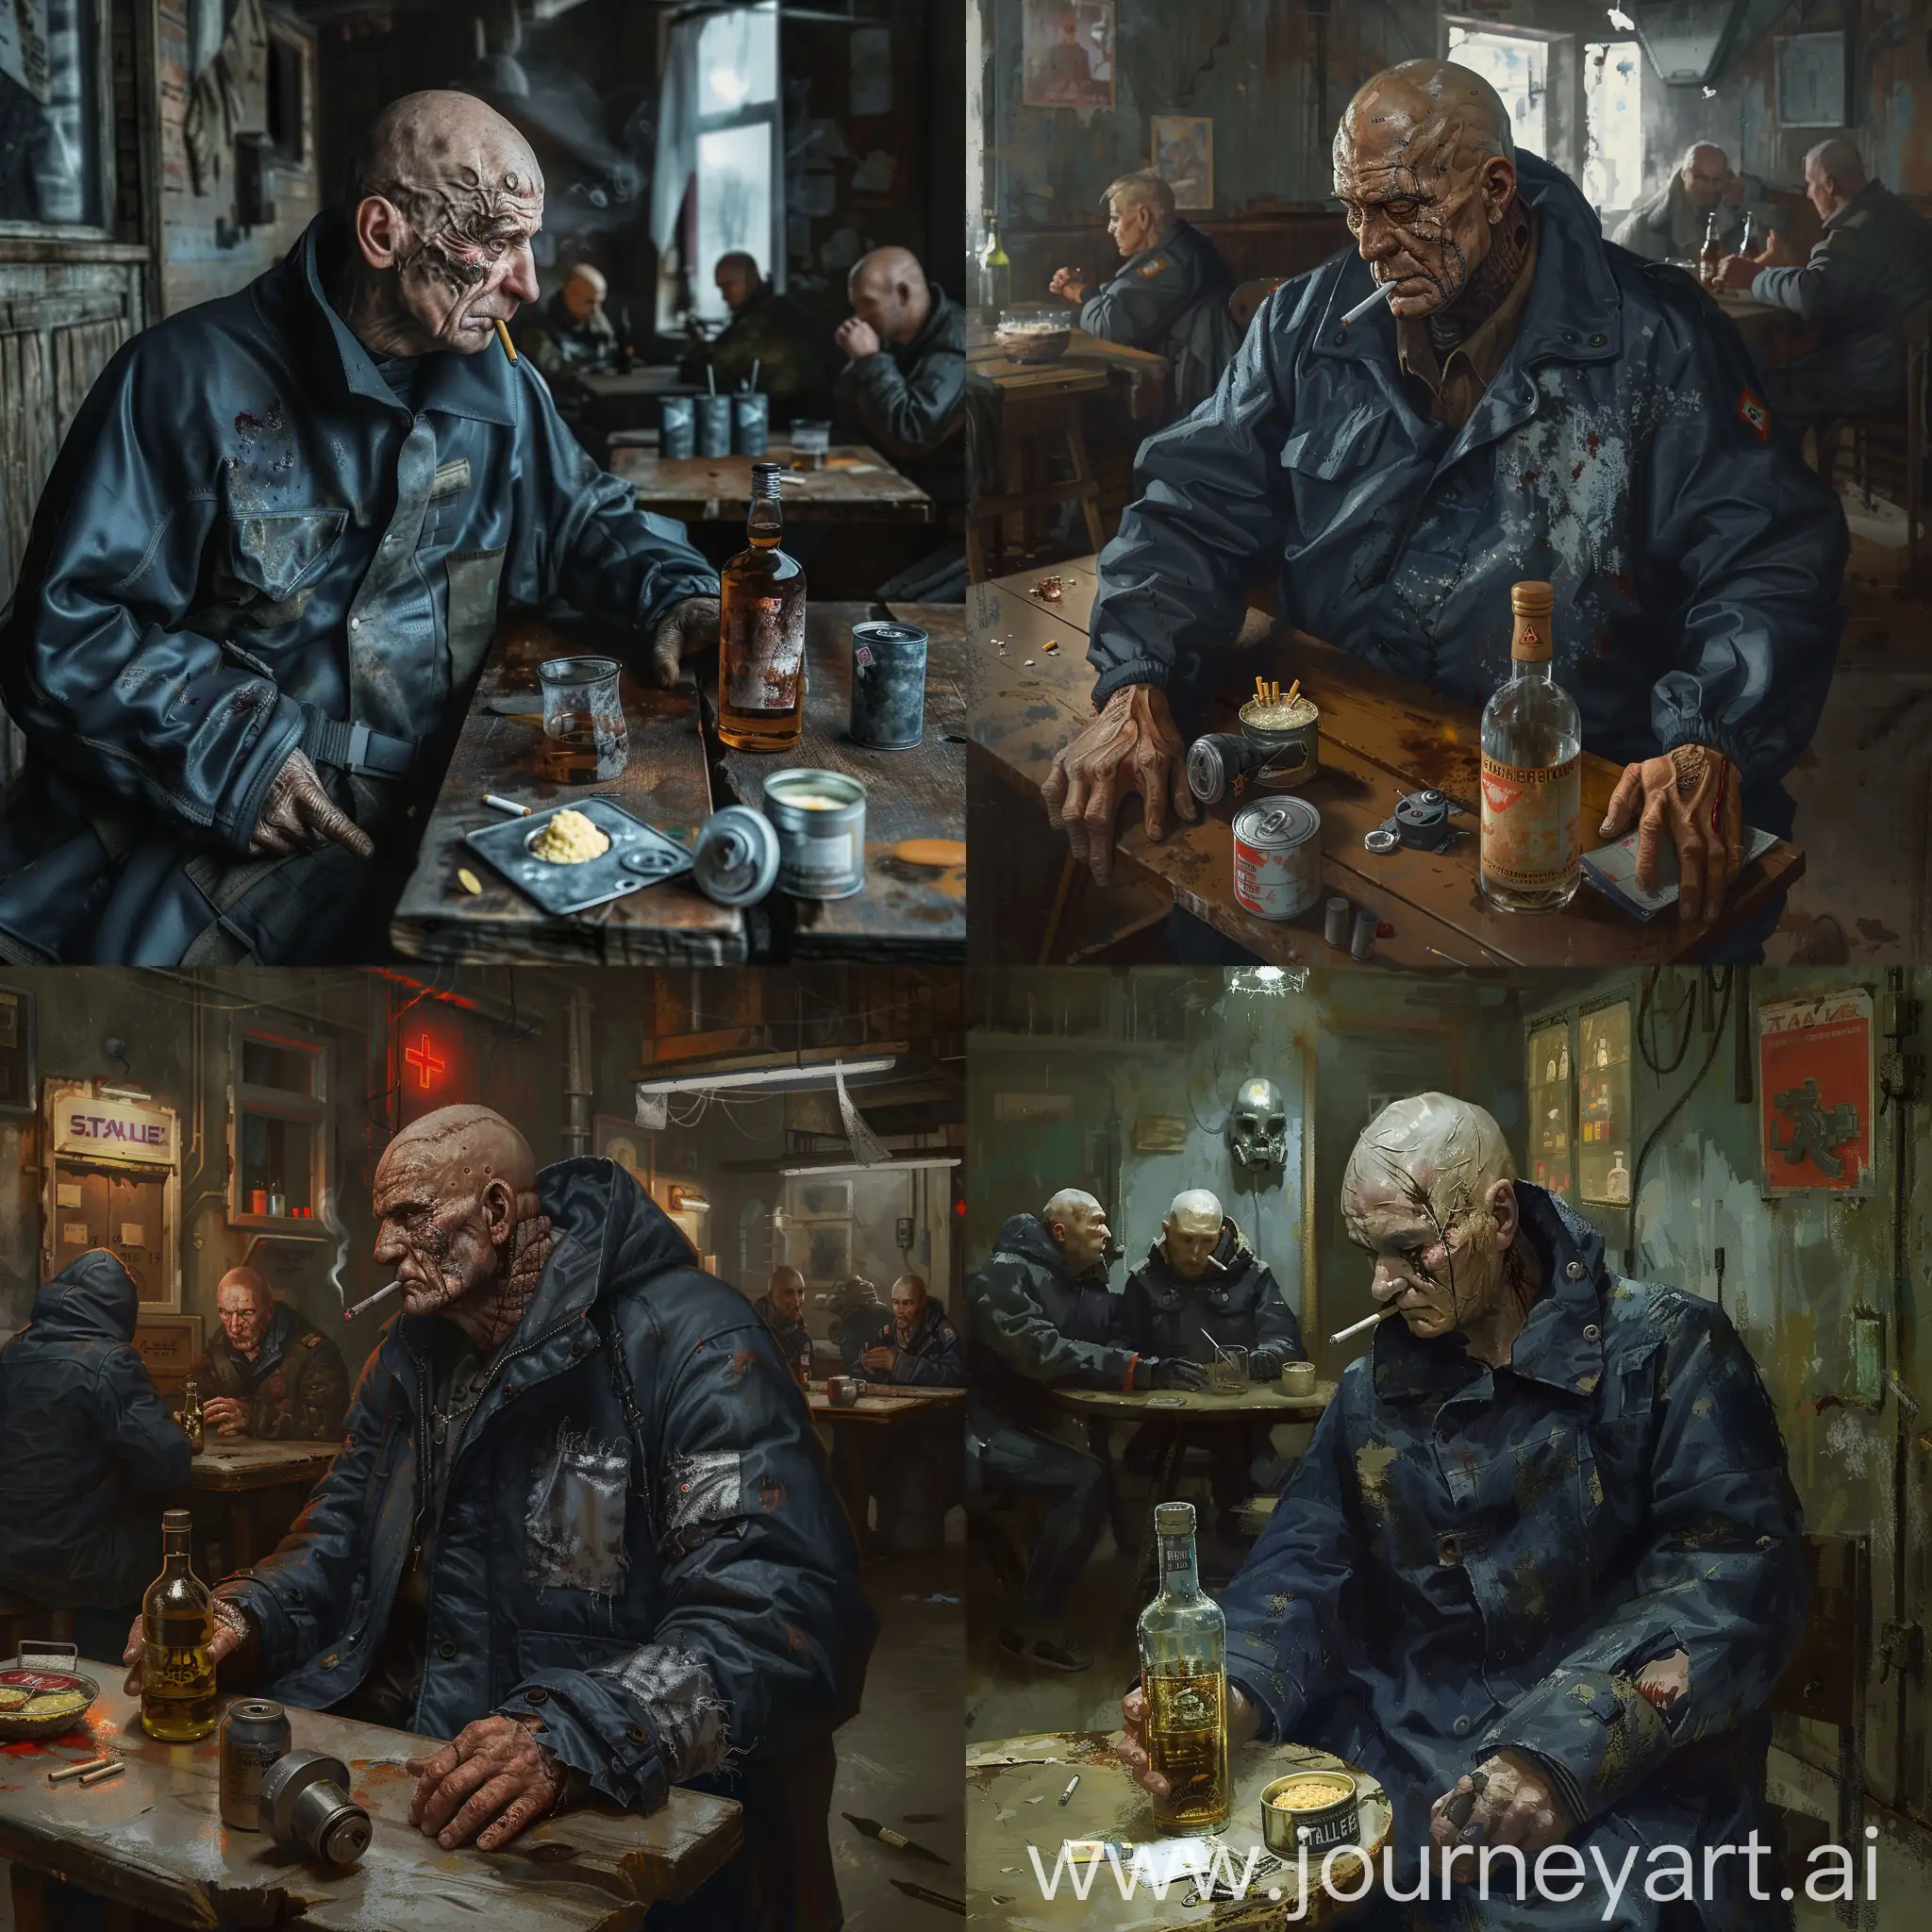 A mercenary from the universe of S.T.A.L.K.E.R, a mercenary dressed in a dark blue military raincoat, a gray military discharge on his body, a bald, mature man of 30 years, many scars on his face, a mercenary sitting in a small old Soviet bar at a separate table, a bottle of vodka in his hand, a cigarette in his mouth, on the table where the mercenary is sitting is laid out: one gas mask, one pack of cigarettes, and one open can of porridge, the bar is dimly lit, you can see several other stalkers at other tables talking to each other.